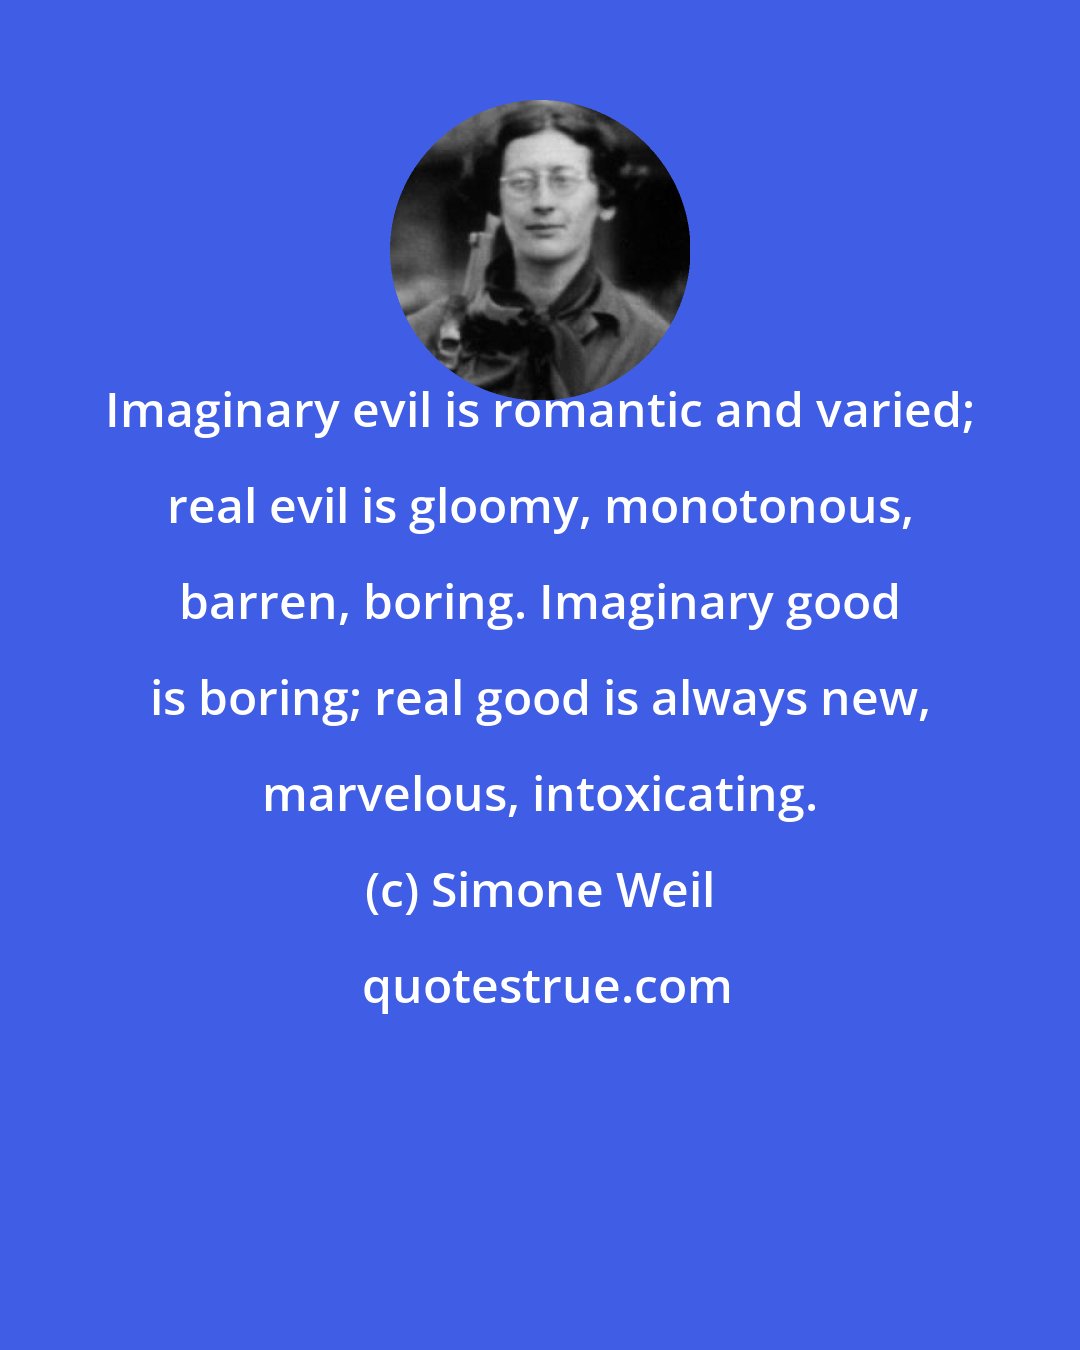 Simone Weil: Imaginary evil is romantic and varied; real evil is gloomy, monotonous, barren, boring. Imaginary good is boring; real good is always new, marvelous, intoxicating.